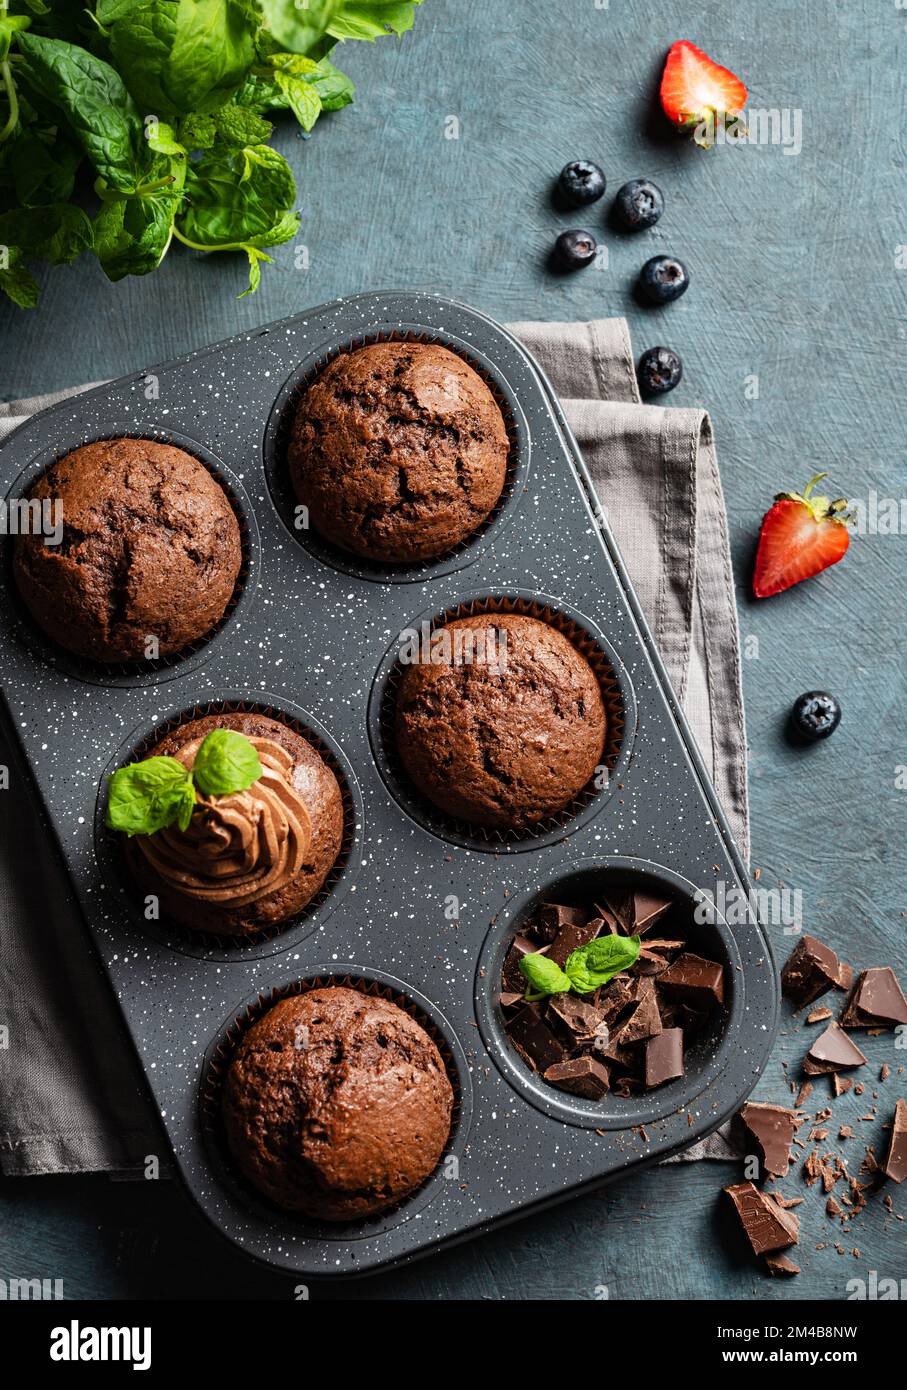 chocolate muffins with blueberry and strawberry slices in a baking dish on a dark  background. Top view. Stock Photo